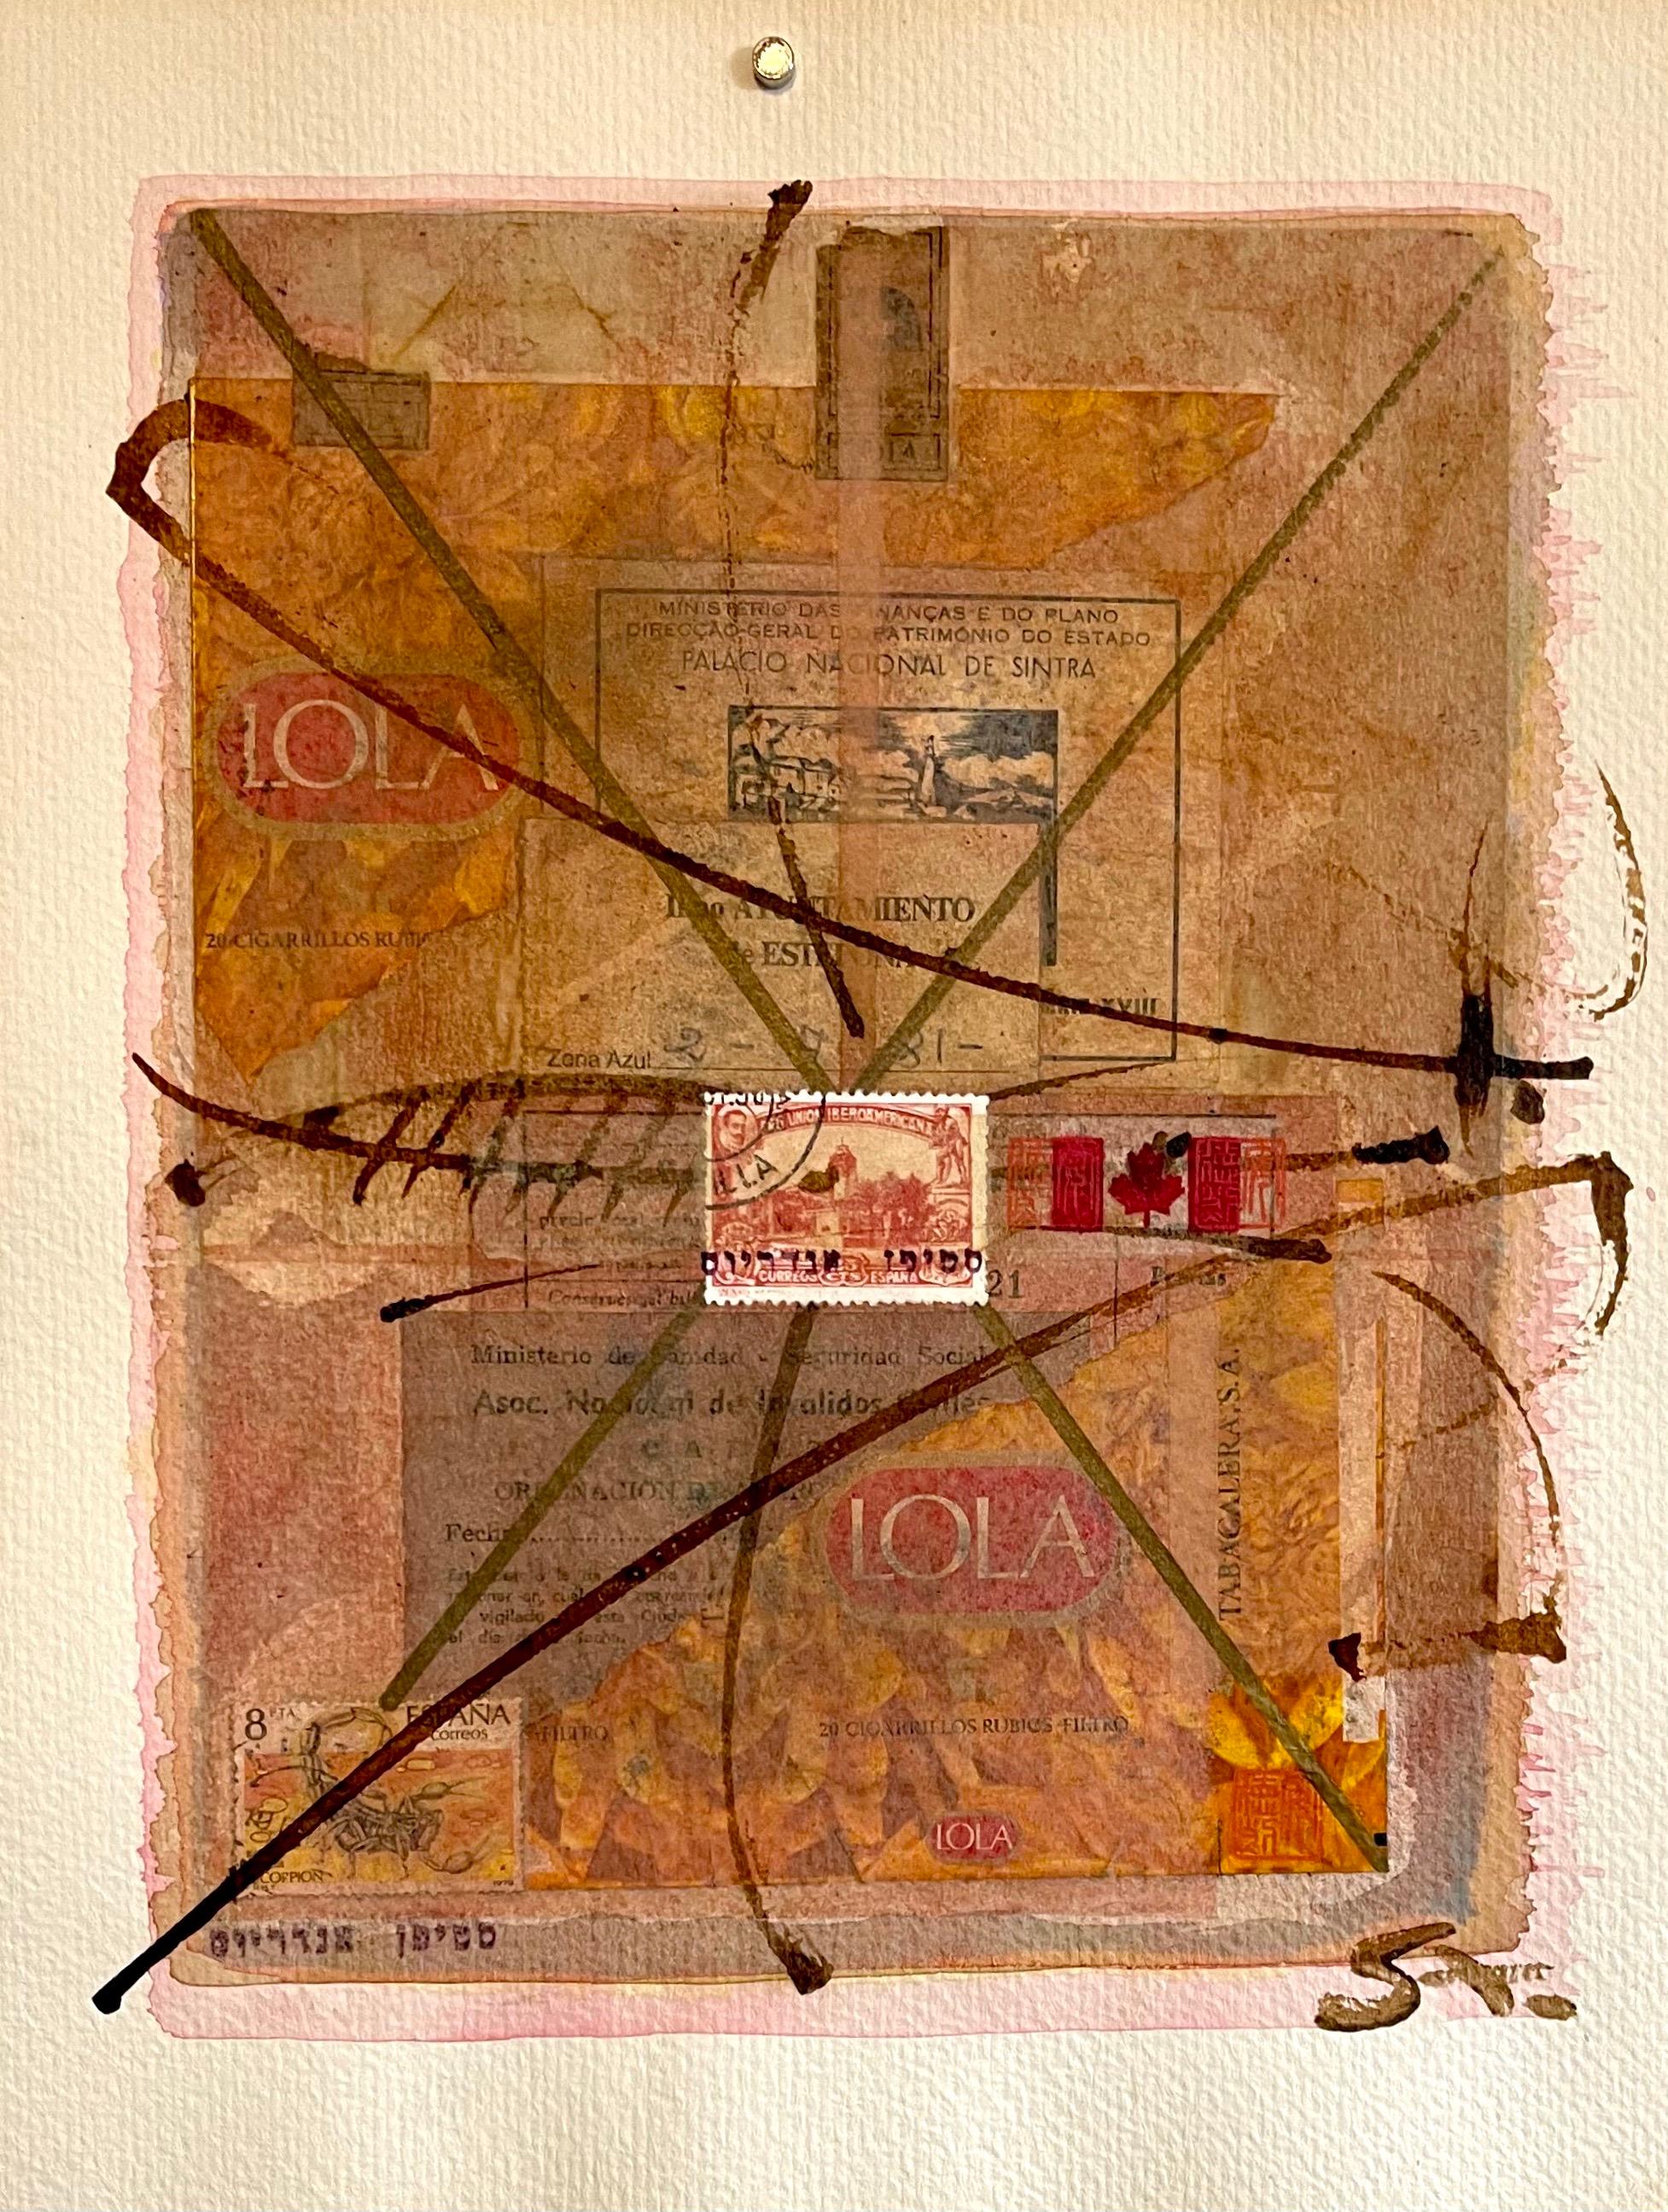 Stephen Andrews Abstract Drawing - Canadian Art Mixed Media Collage Assemblage Painting Hebrew Canada Stamp